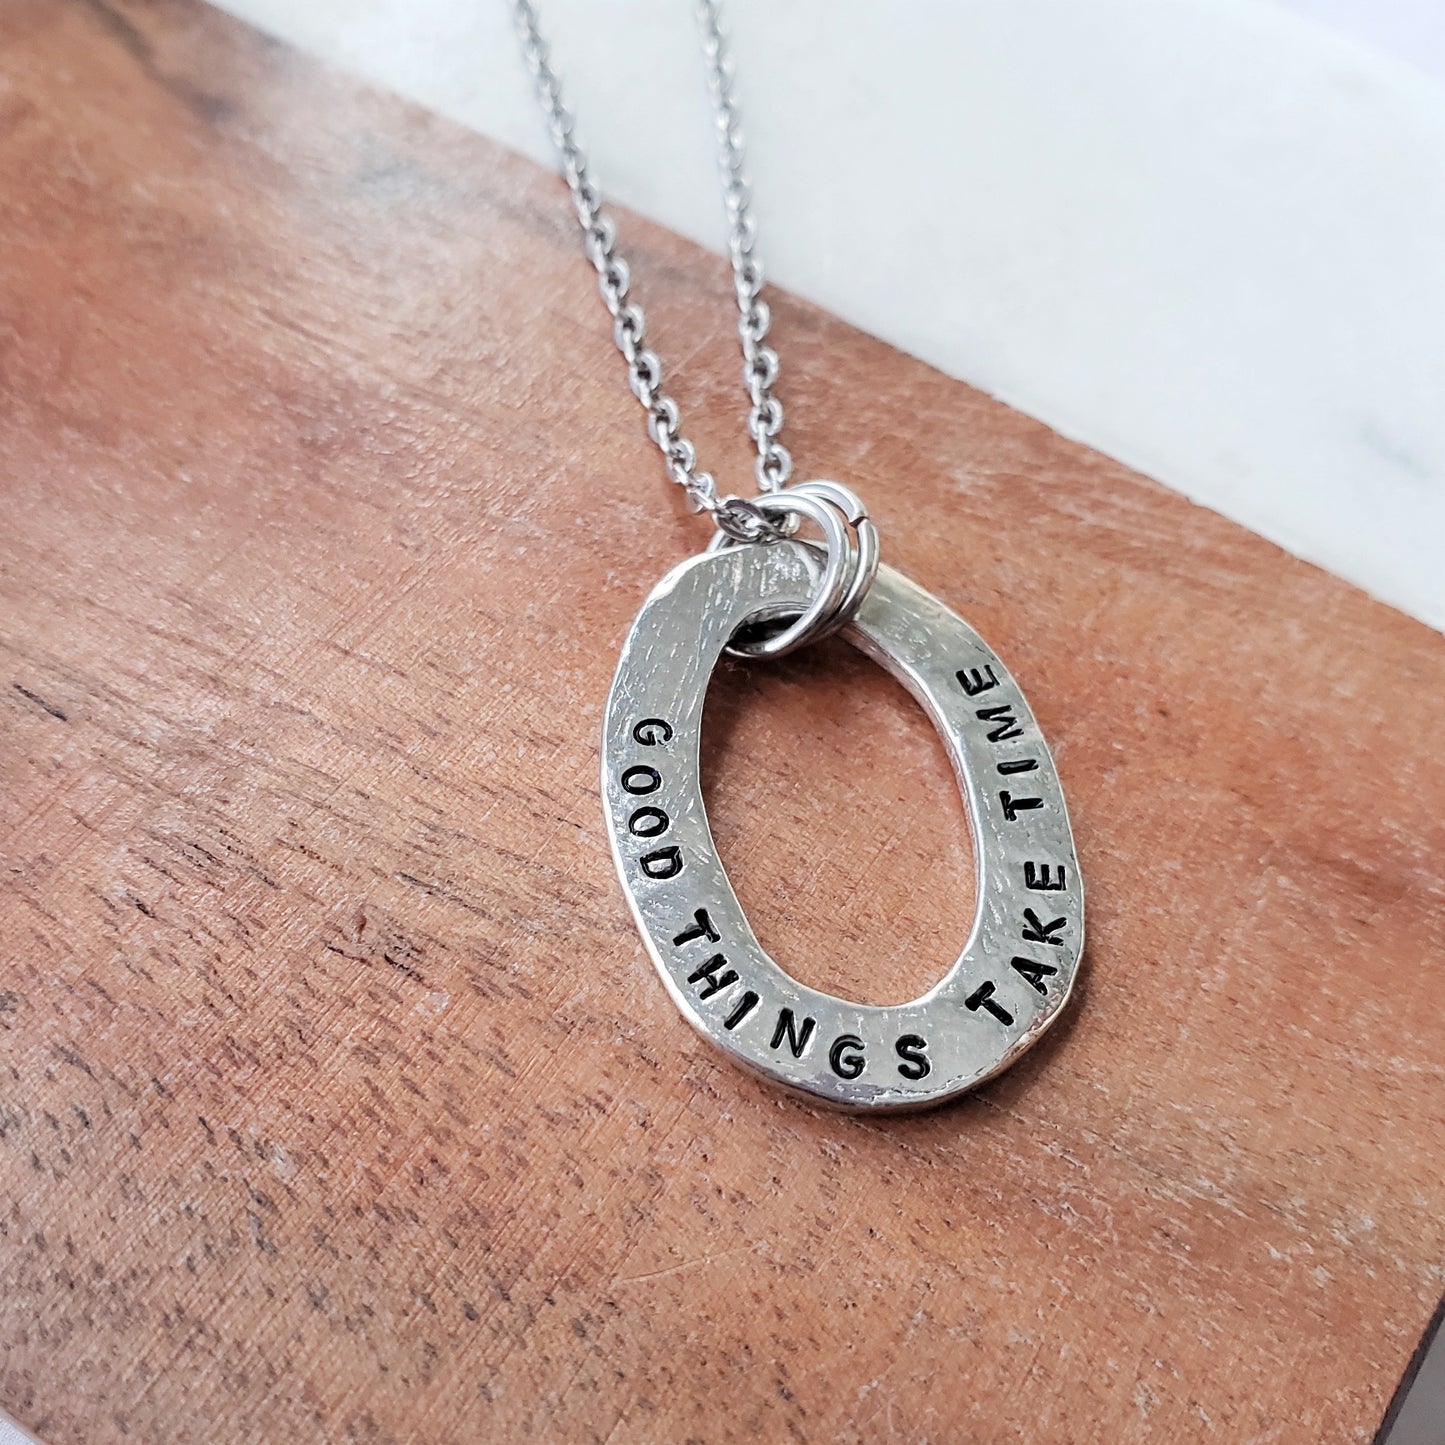 Good Things Take Time Pewter Washer Necklace